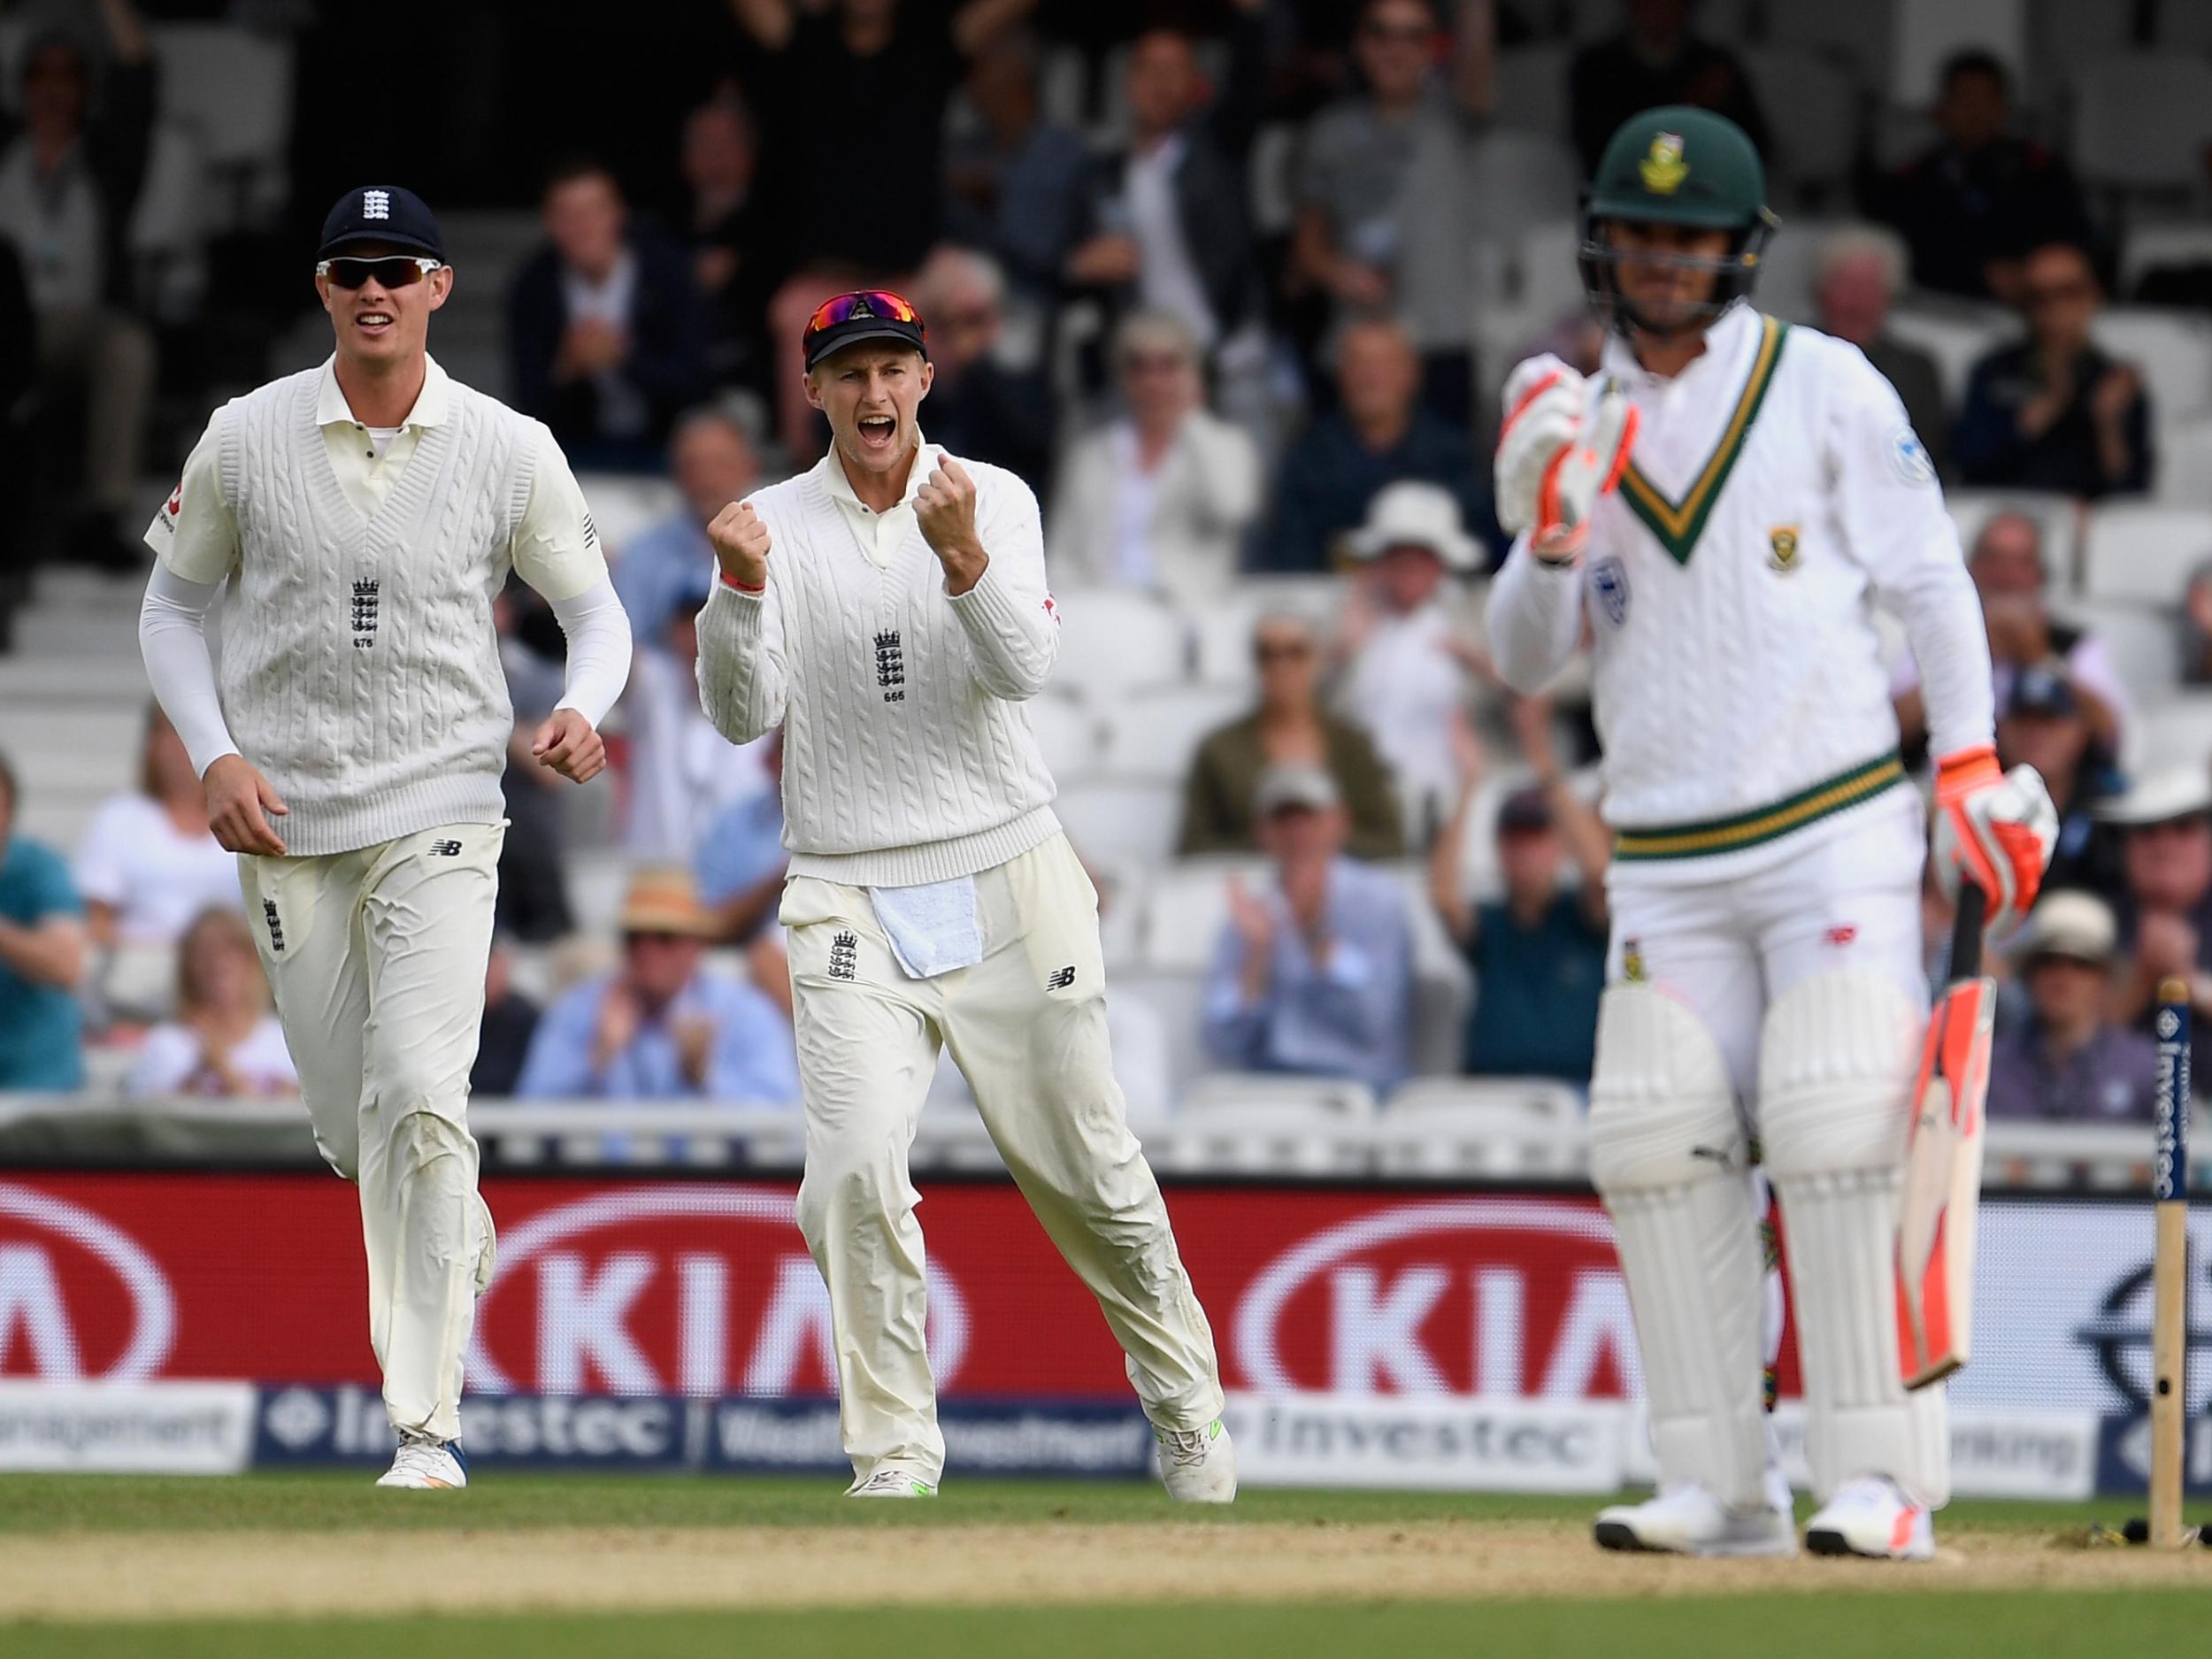 England need six wickets to claim victory on the final day